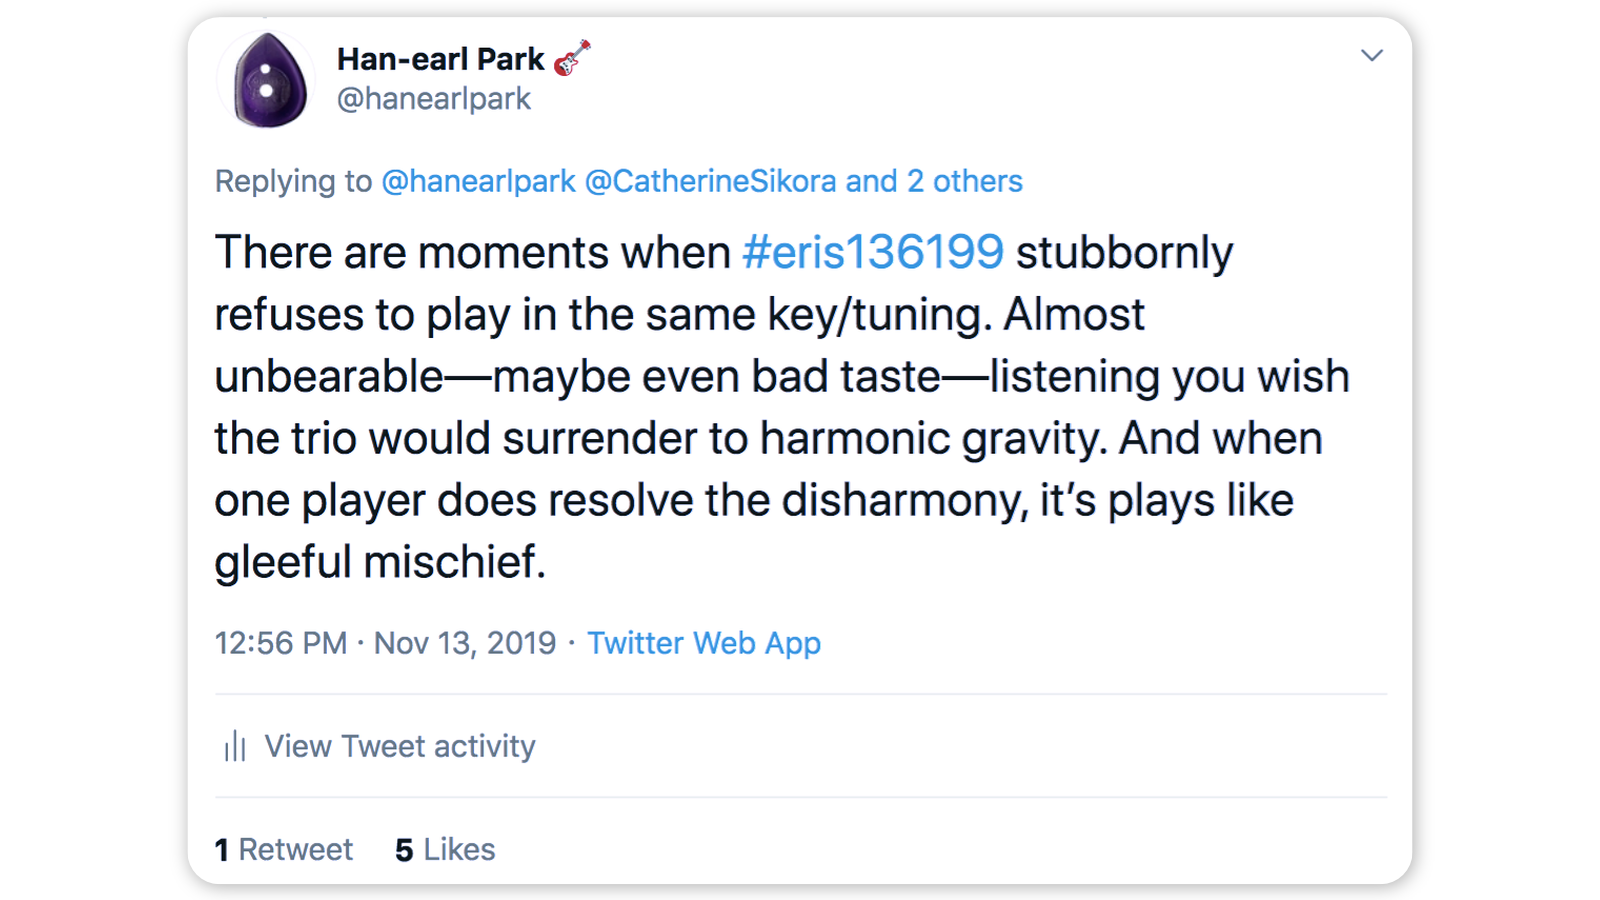 “There are moments when #eris136199 stubbornly refuses to play in the same key/tuning. Almost unbearable—maybe even bad taste—listening you wish the trio would surrender to harmonic gravity. And when one player does resolve the disharmony, it’s plays like gleeful mischief.”